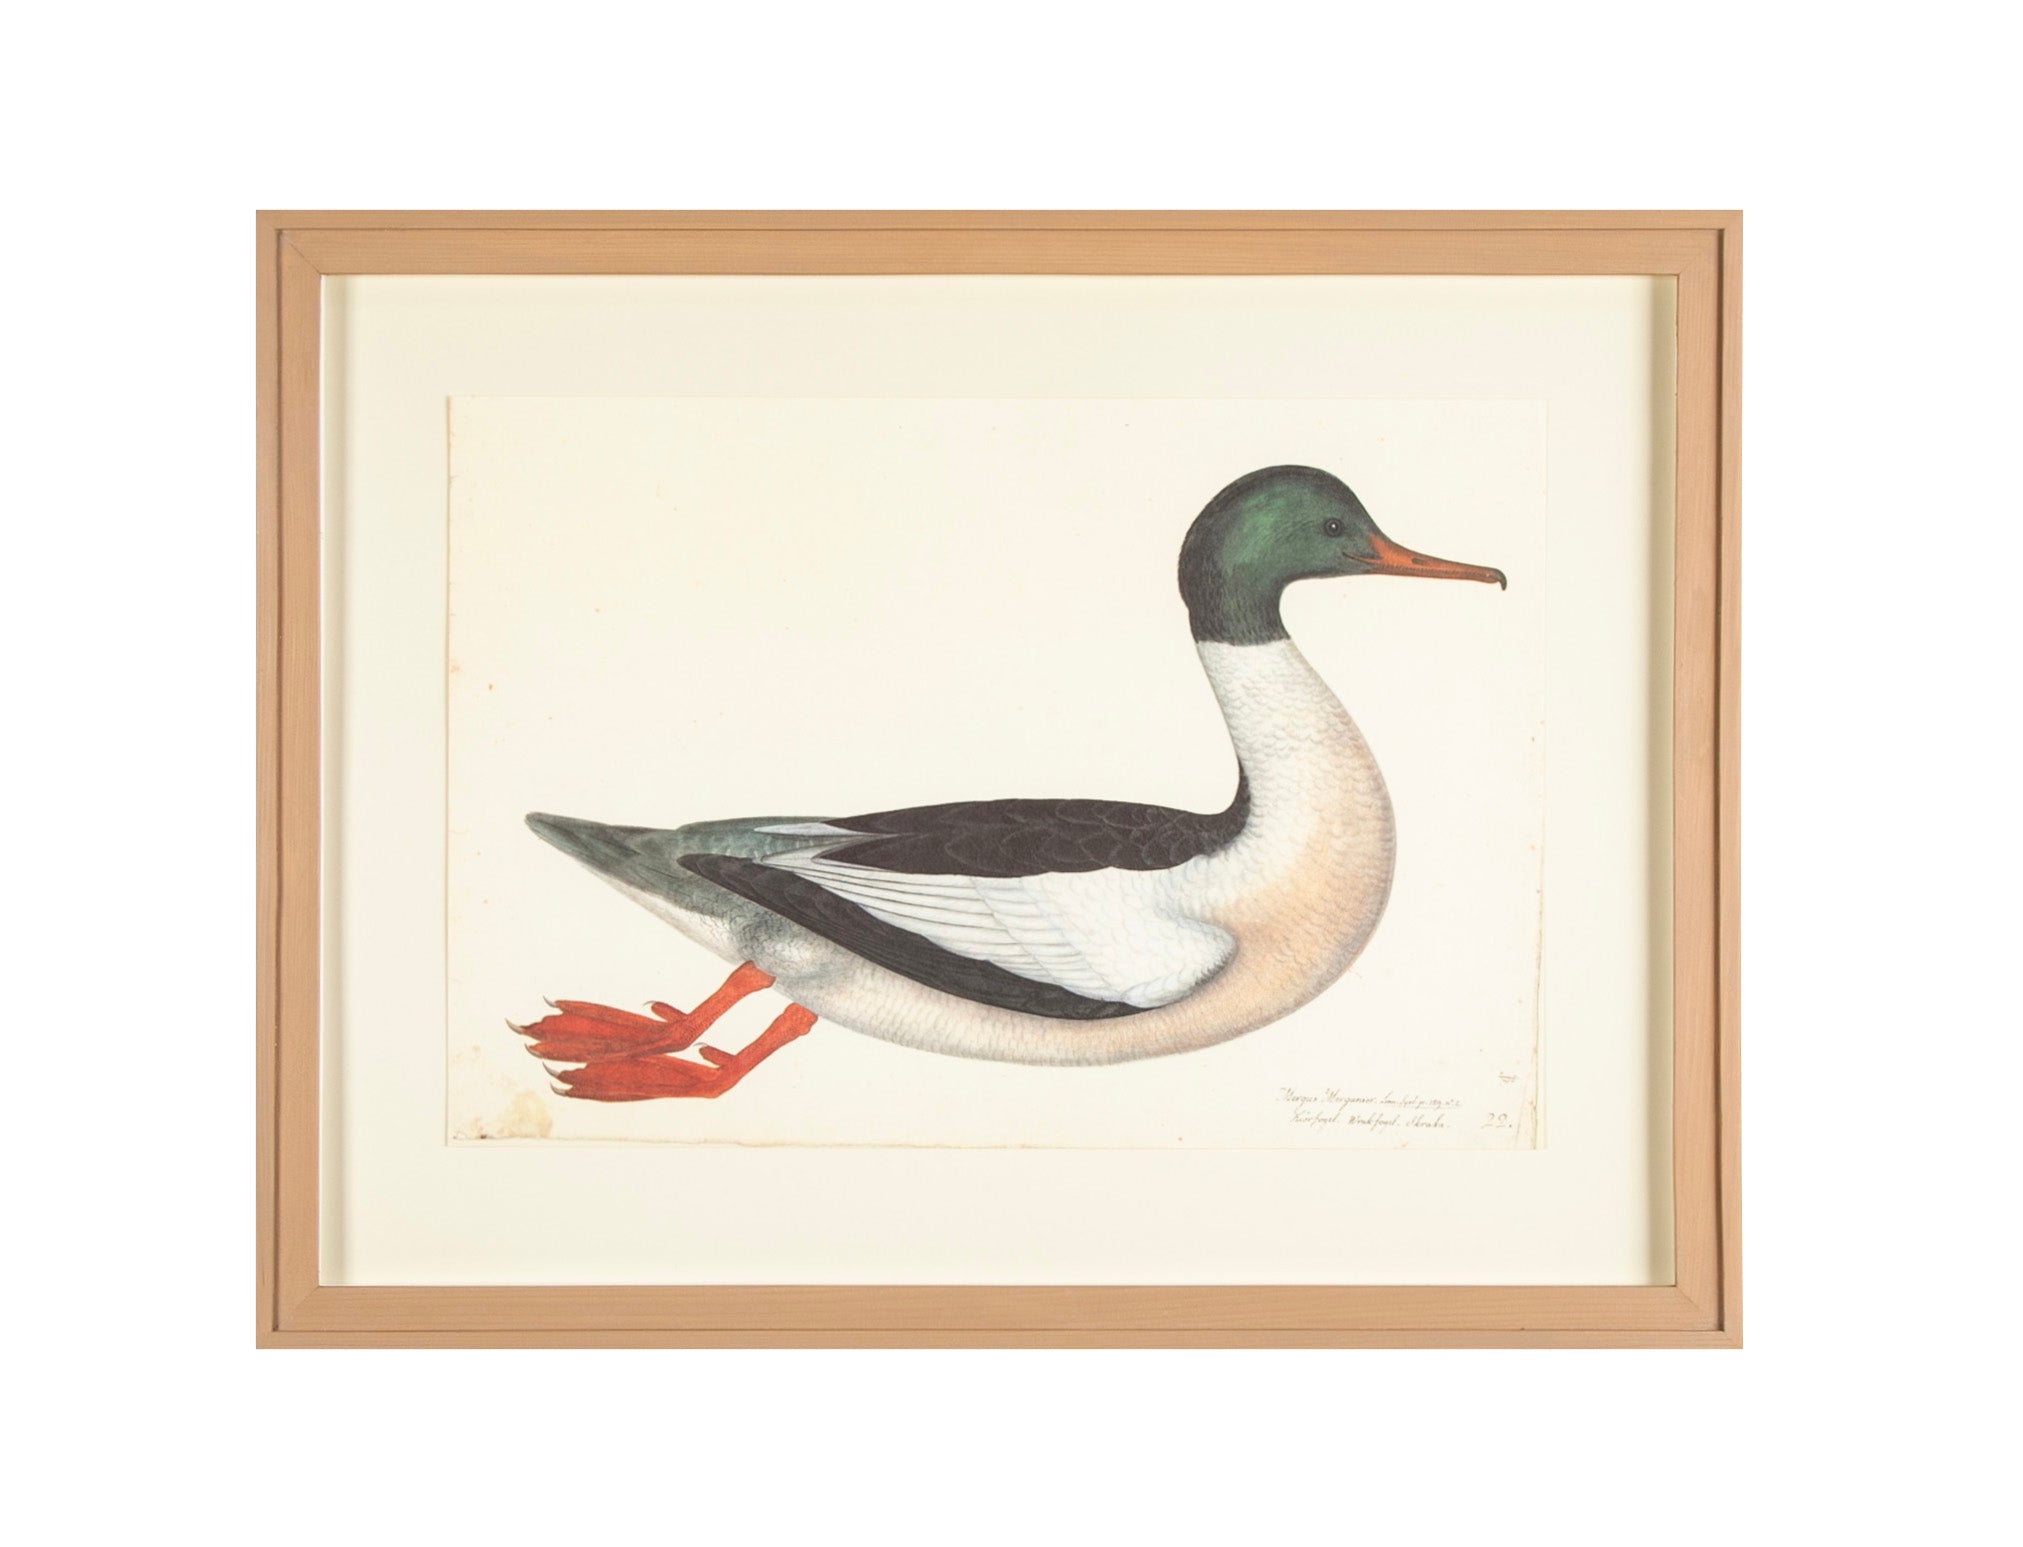 Offset Lithograph of "Goosander Male, PL 22"  from the "The  Great Bird Book" by Olof Rudbeck The Younger